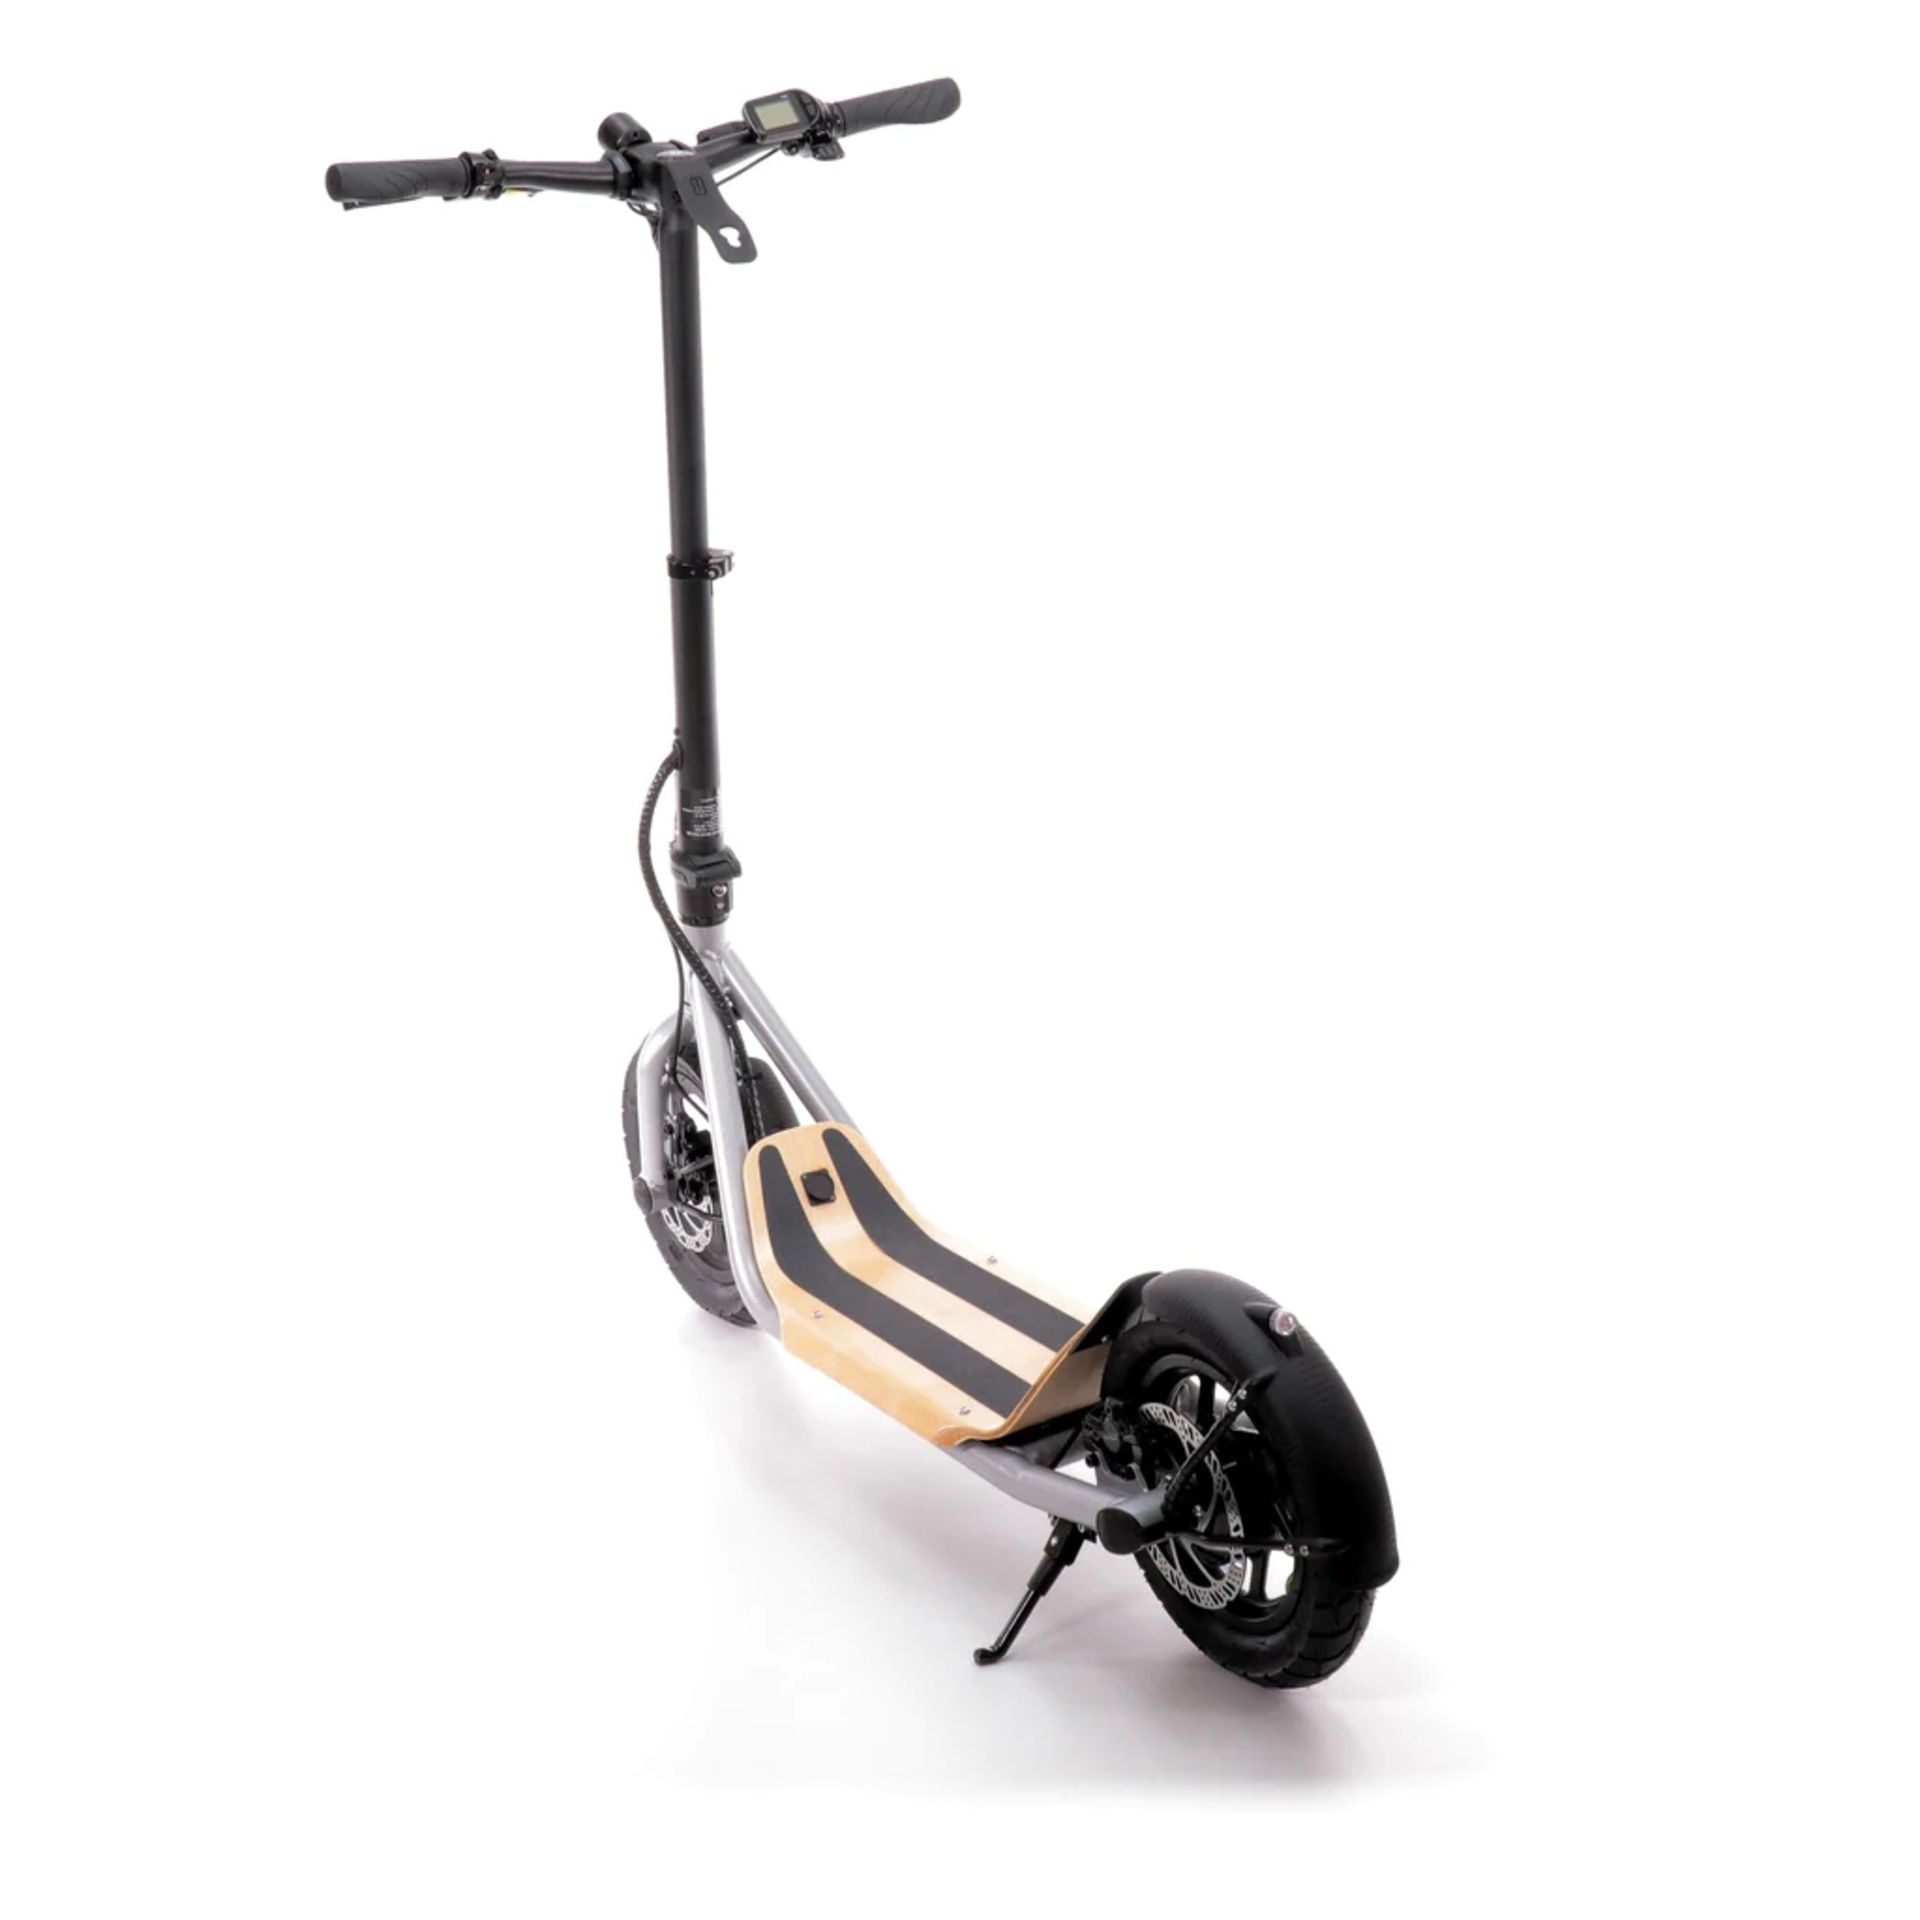 BRAND NEW 8TEV B12 PROXI CLASSIC ELECTRIC SCOOTER SILVER RRP £1299, Perfect city commuter vehicle - Bild 3 aus 3